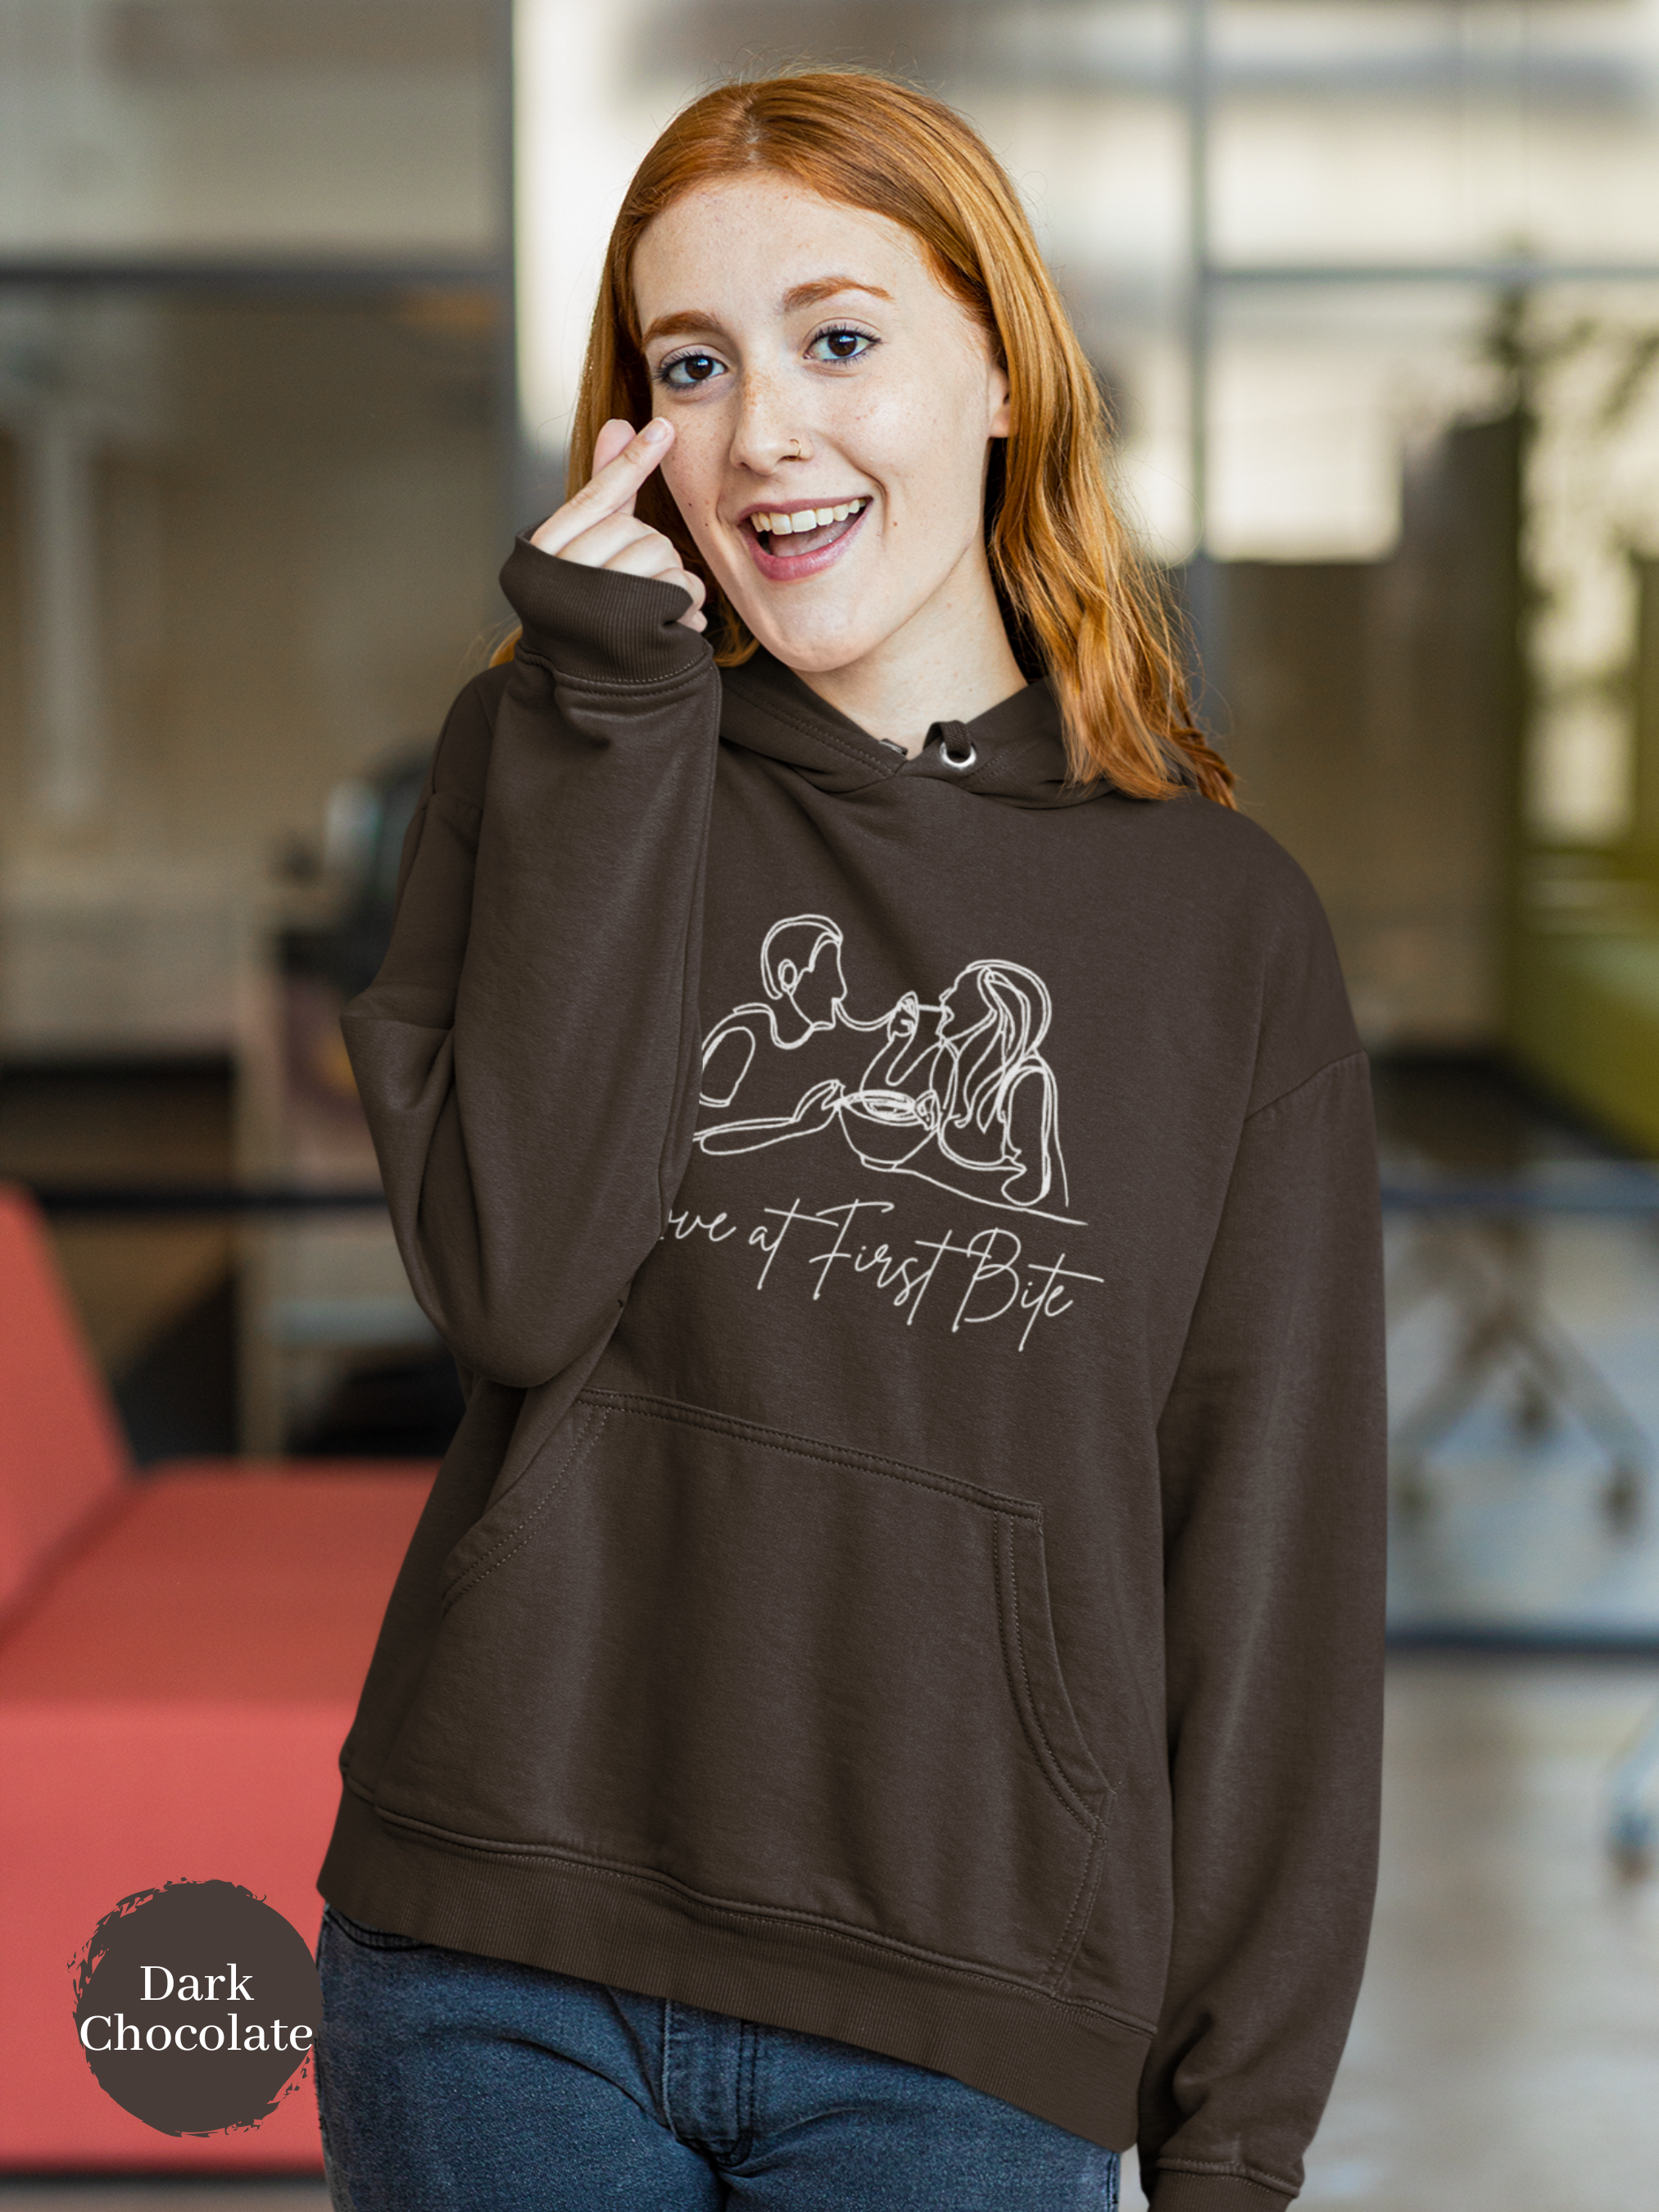 Ramen Hoodie: Love at First Bite - Cute Asian Food Hoodie with a Playful Pun Twist